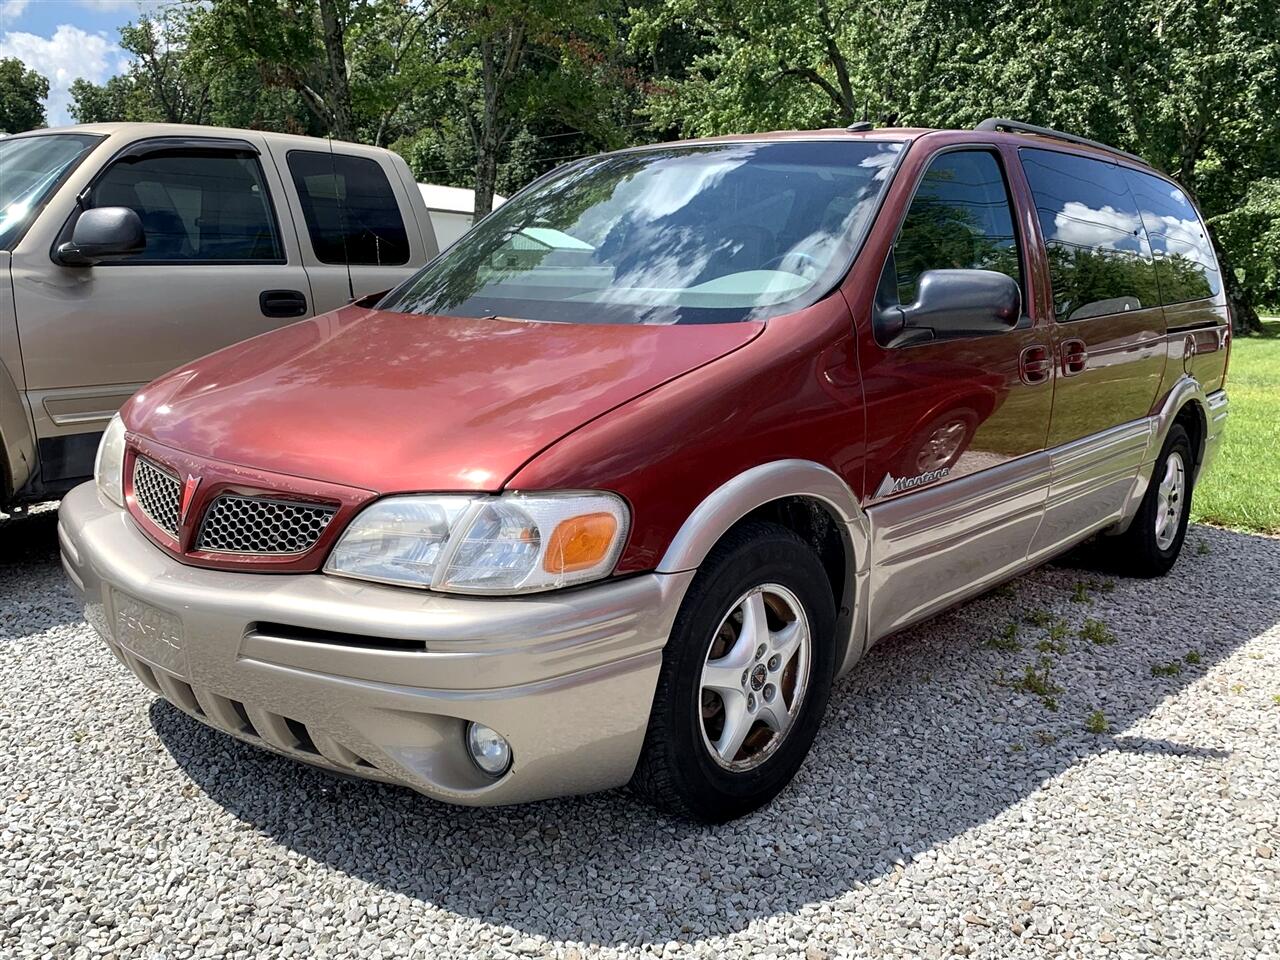 Used 2002 Pontiac Montana 1SA Extended for Sale in North Vernon IN 47265  Doyle's Auto Sales